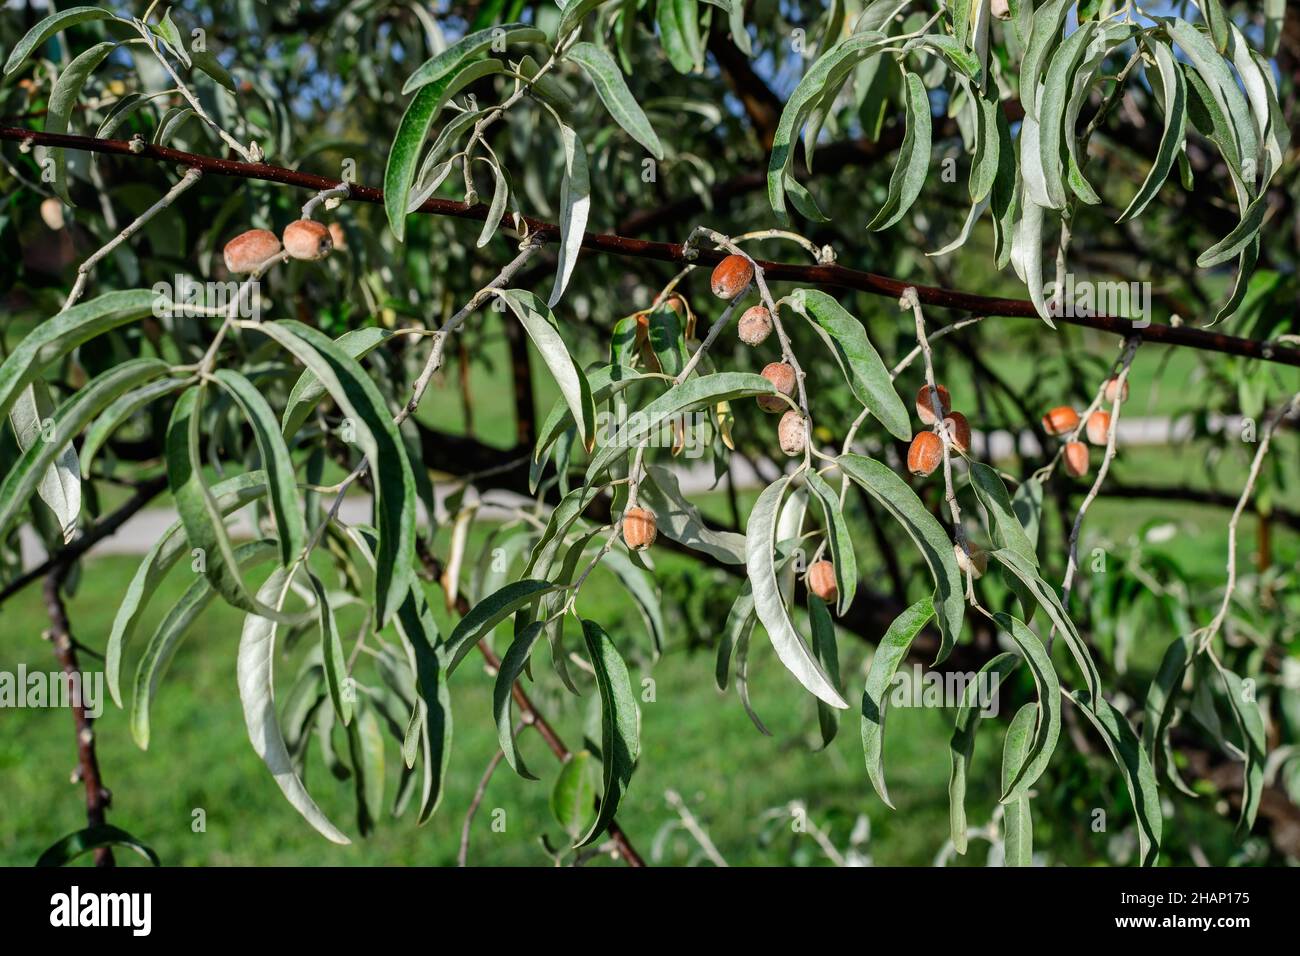 Silver leaves and small ripe fruits or berries of Elaeagnus angustifolia plant, commonly called wild Russian or Persian olive, silver berry, oleaster, Stock Photo